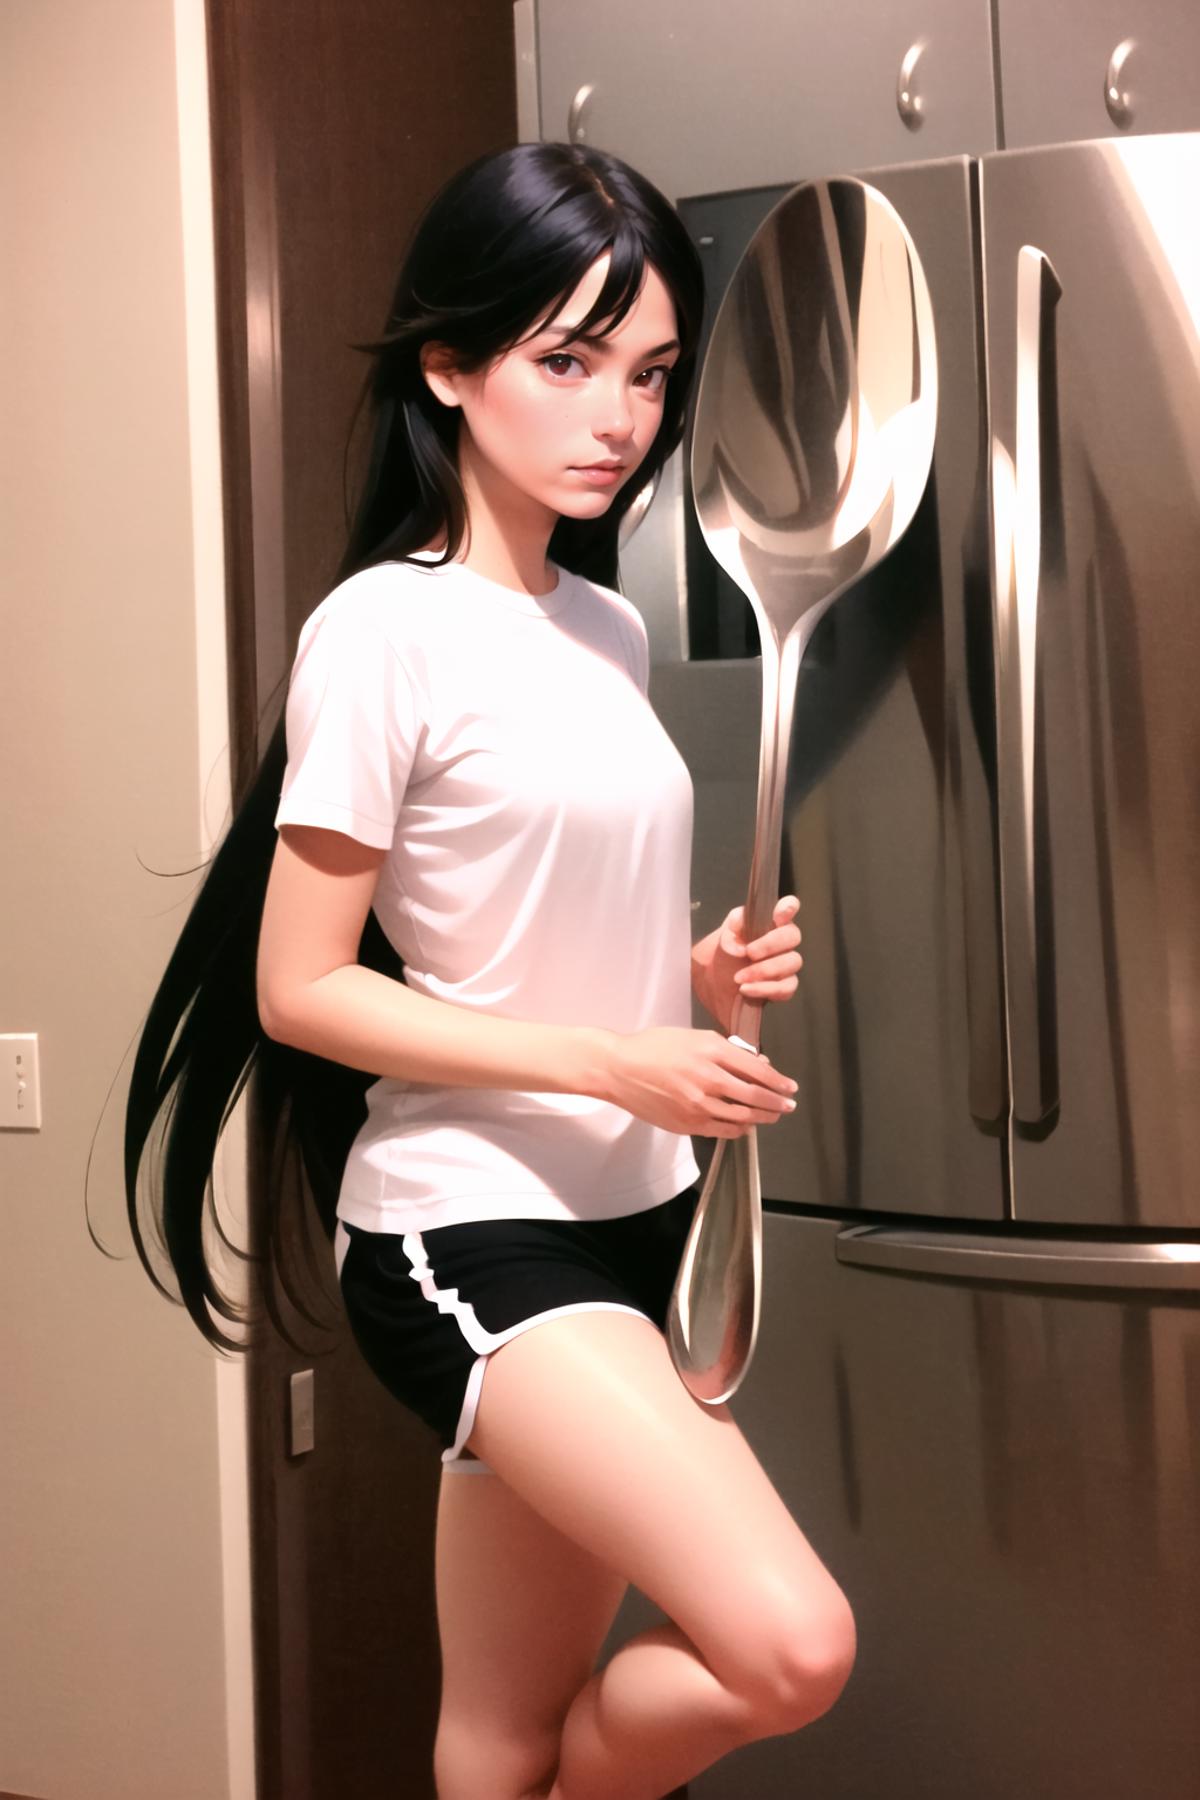 Comically Large Spoon | Concept LoRA image by FallenIncursio